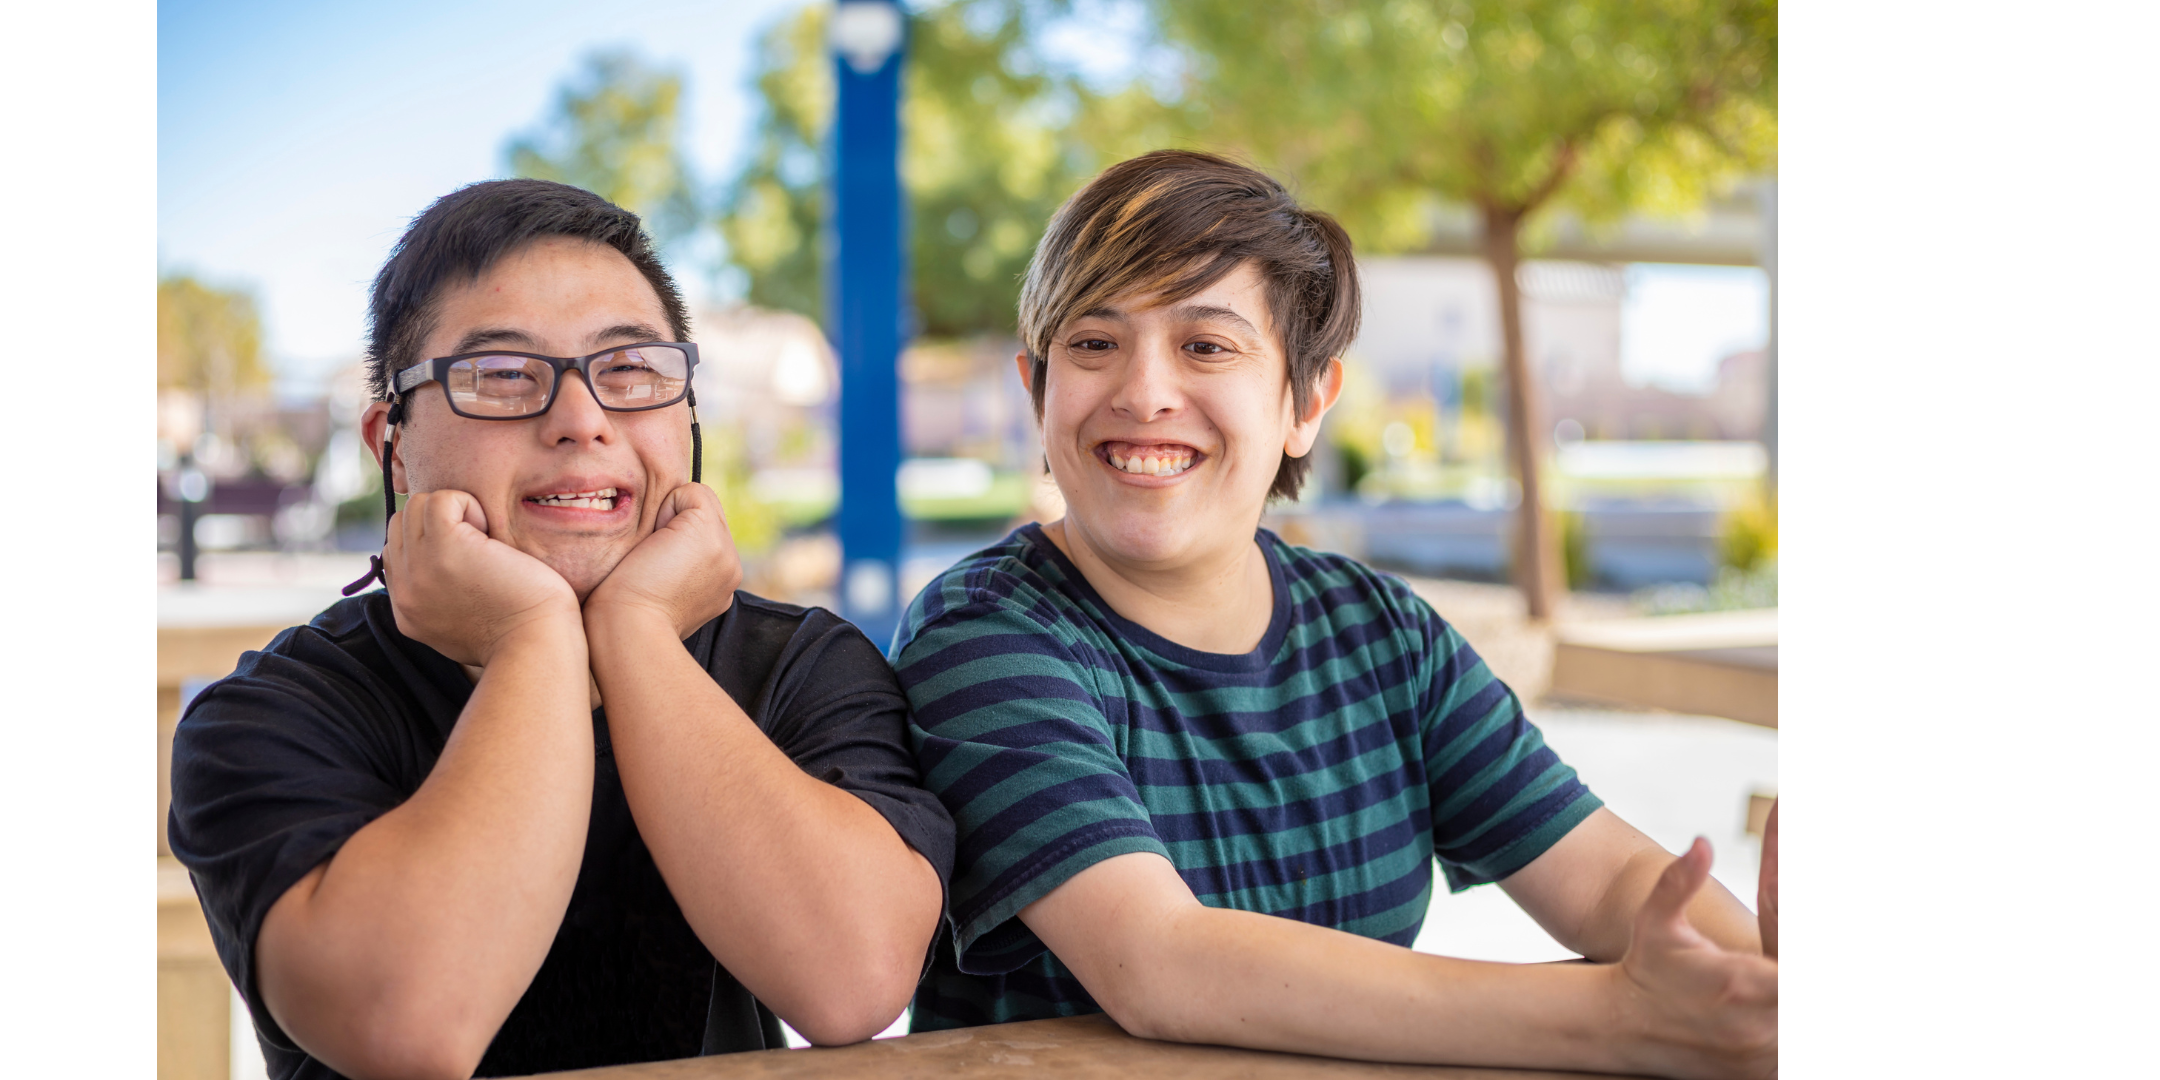 Two young people smiling and sitting on a bench in a park